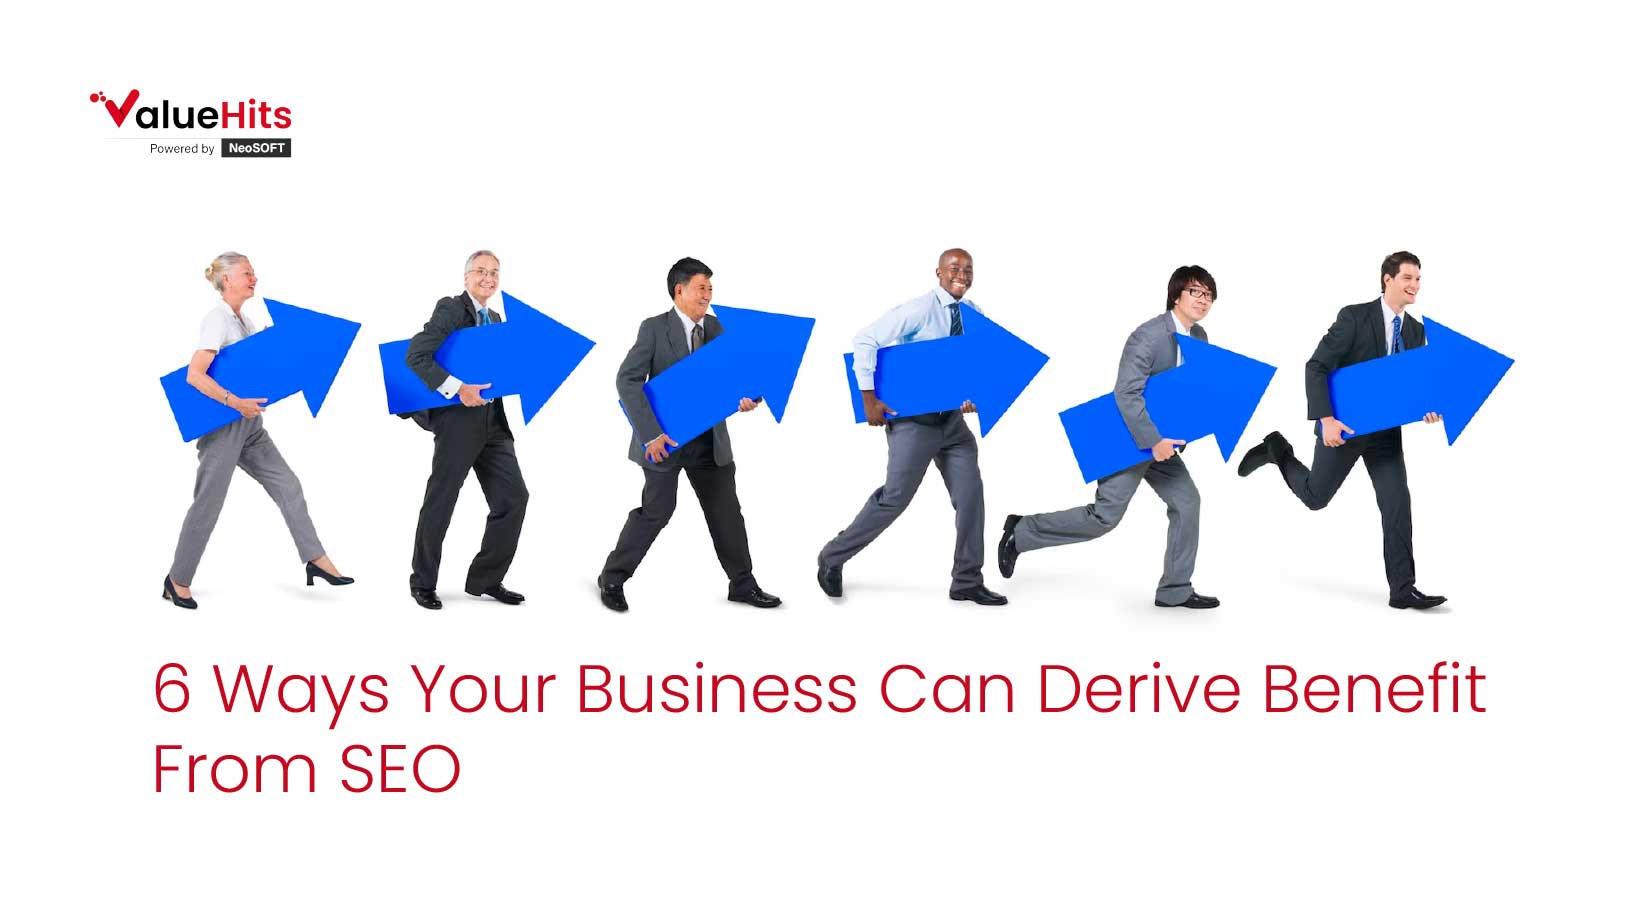 6 Ways Your Business Can Derive Benefit From SEO